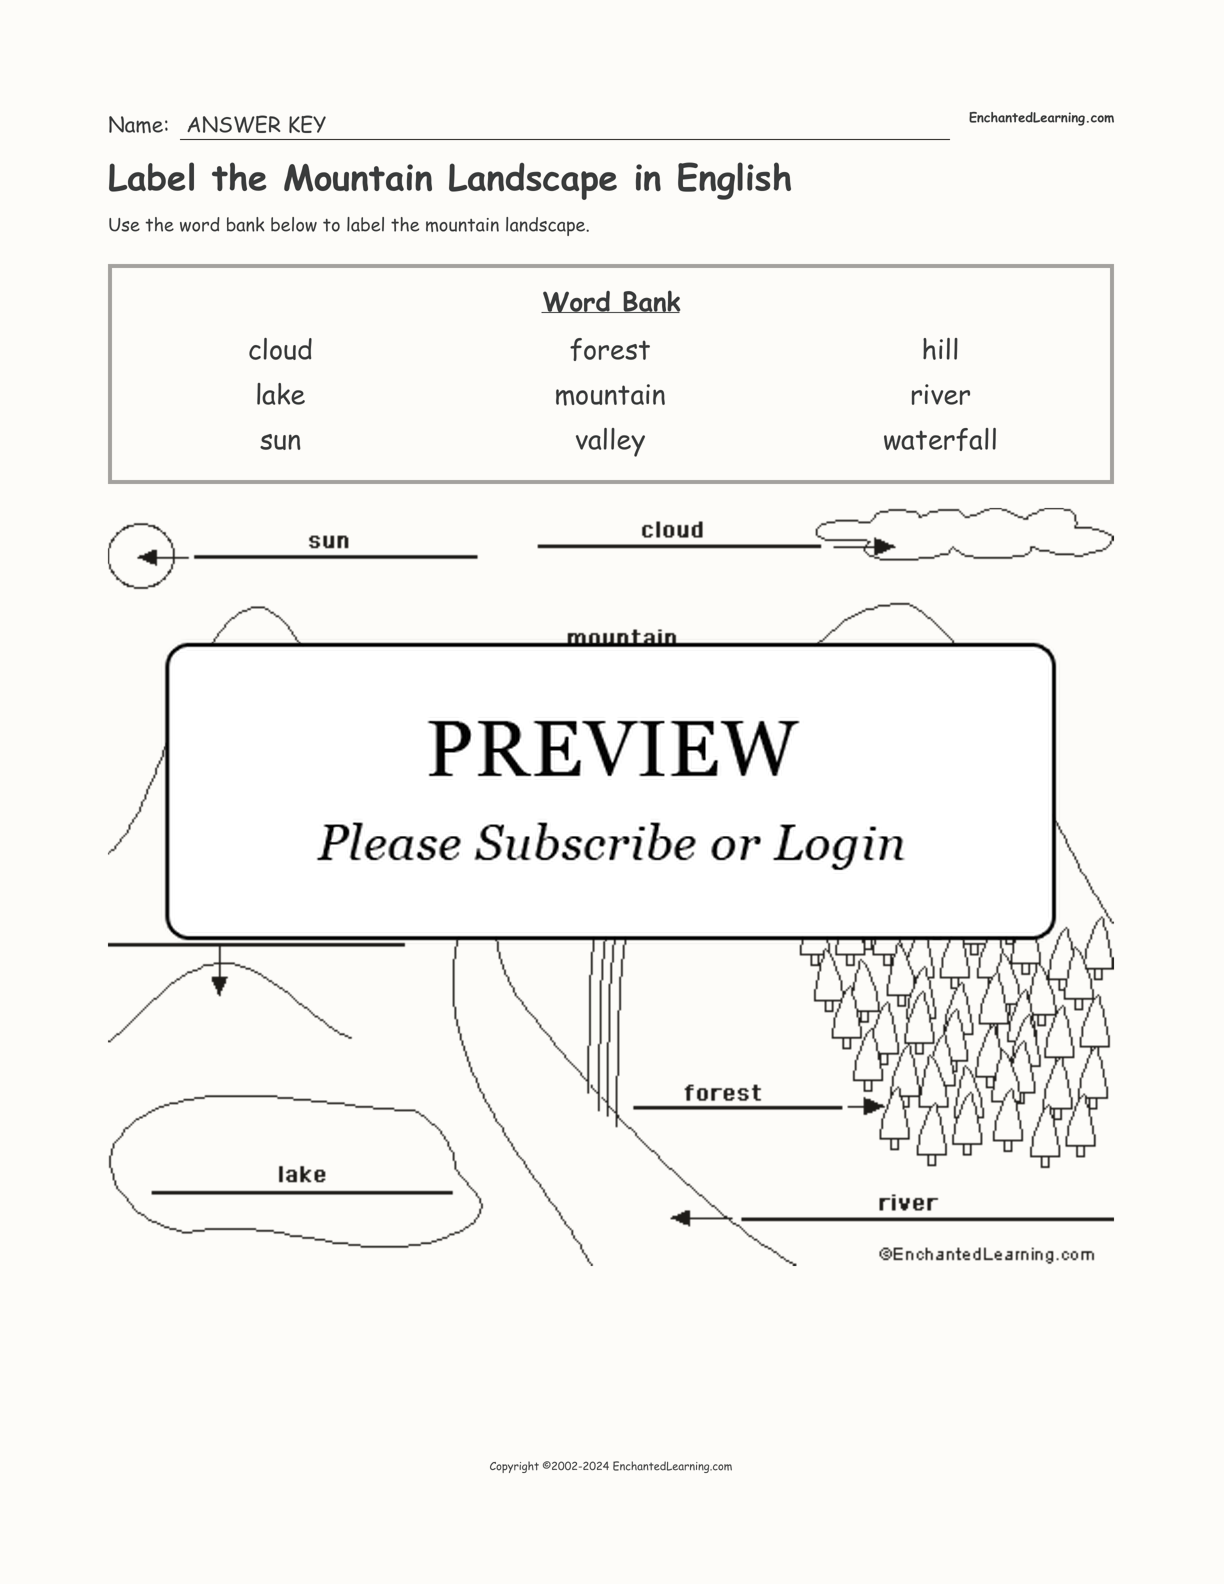 Label the Mountain Landscape in English interactive worksheet page 2